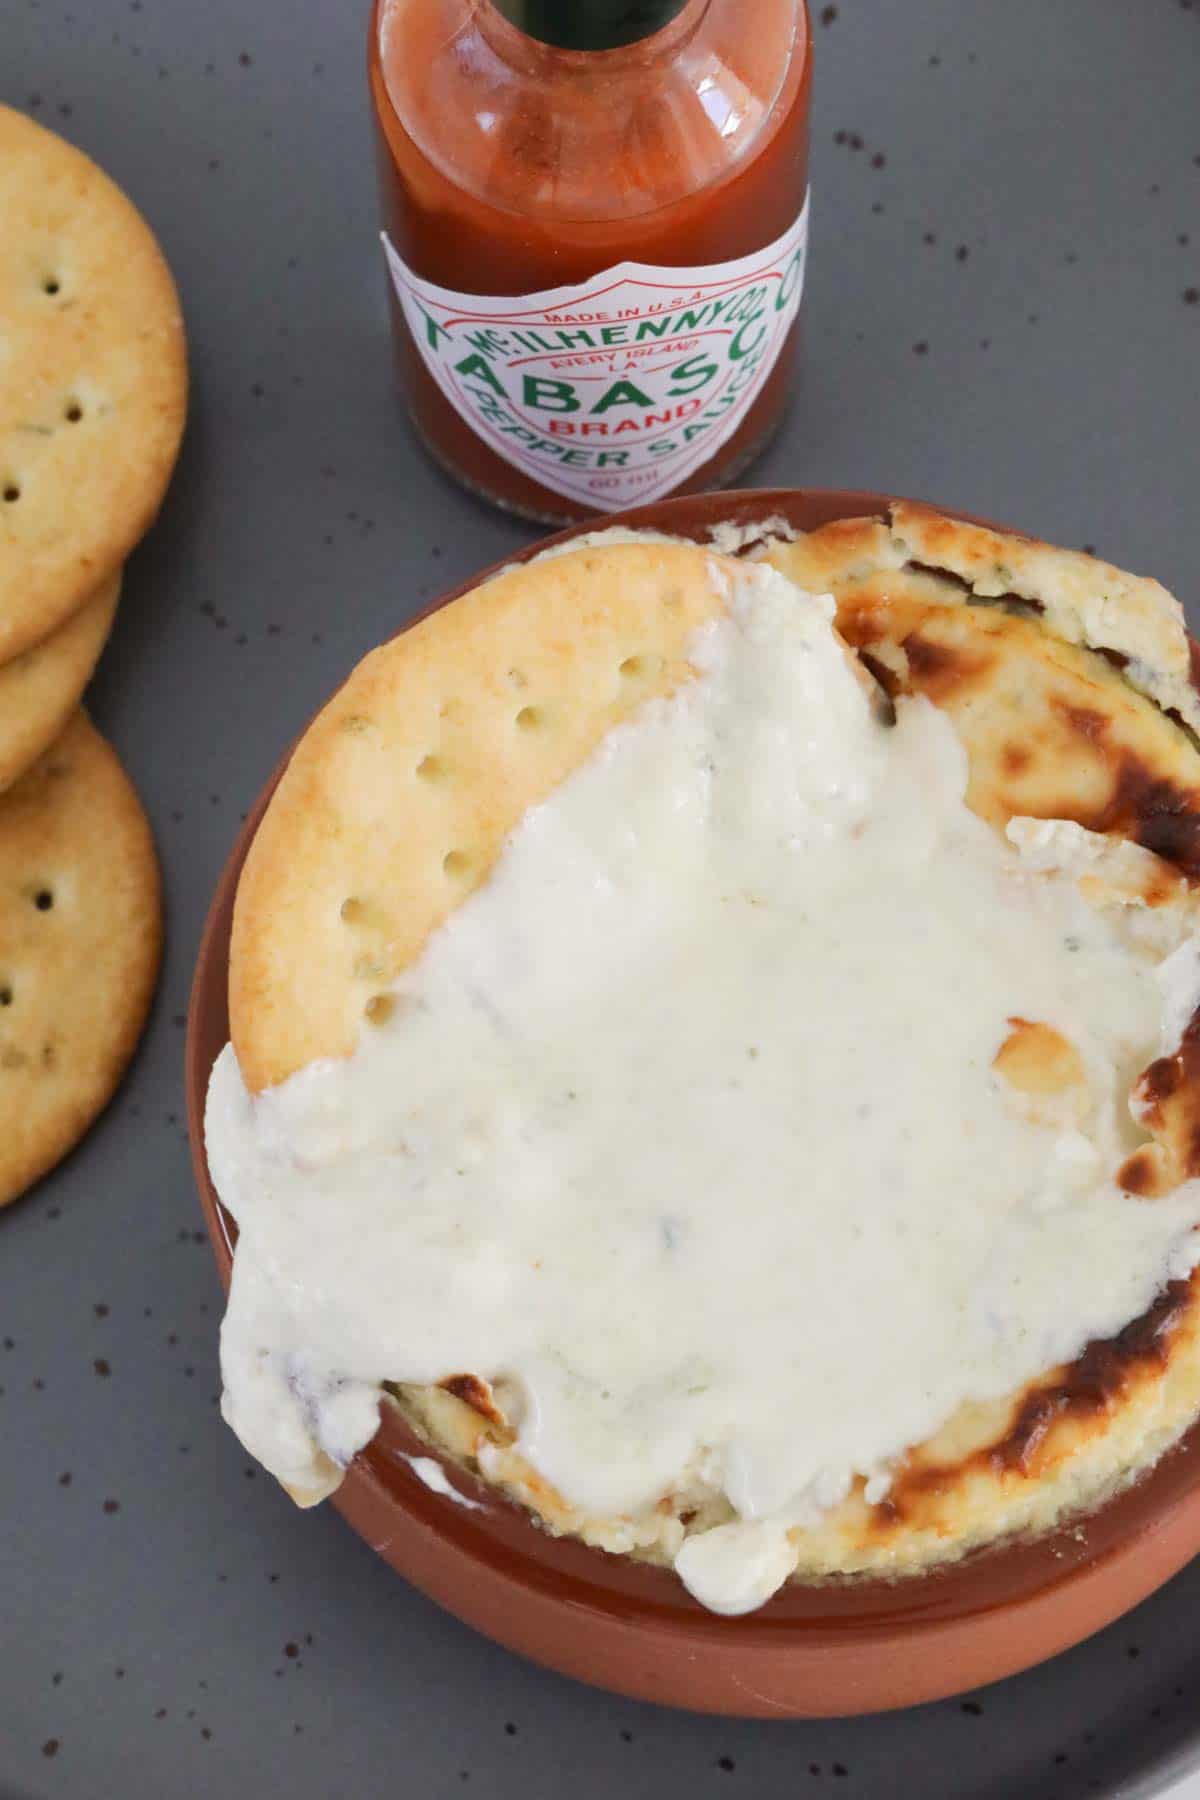 Blue cheese dip slathered over a cracker.